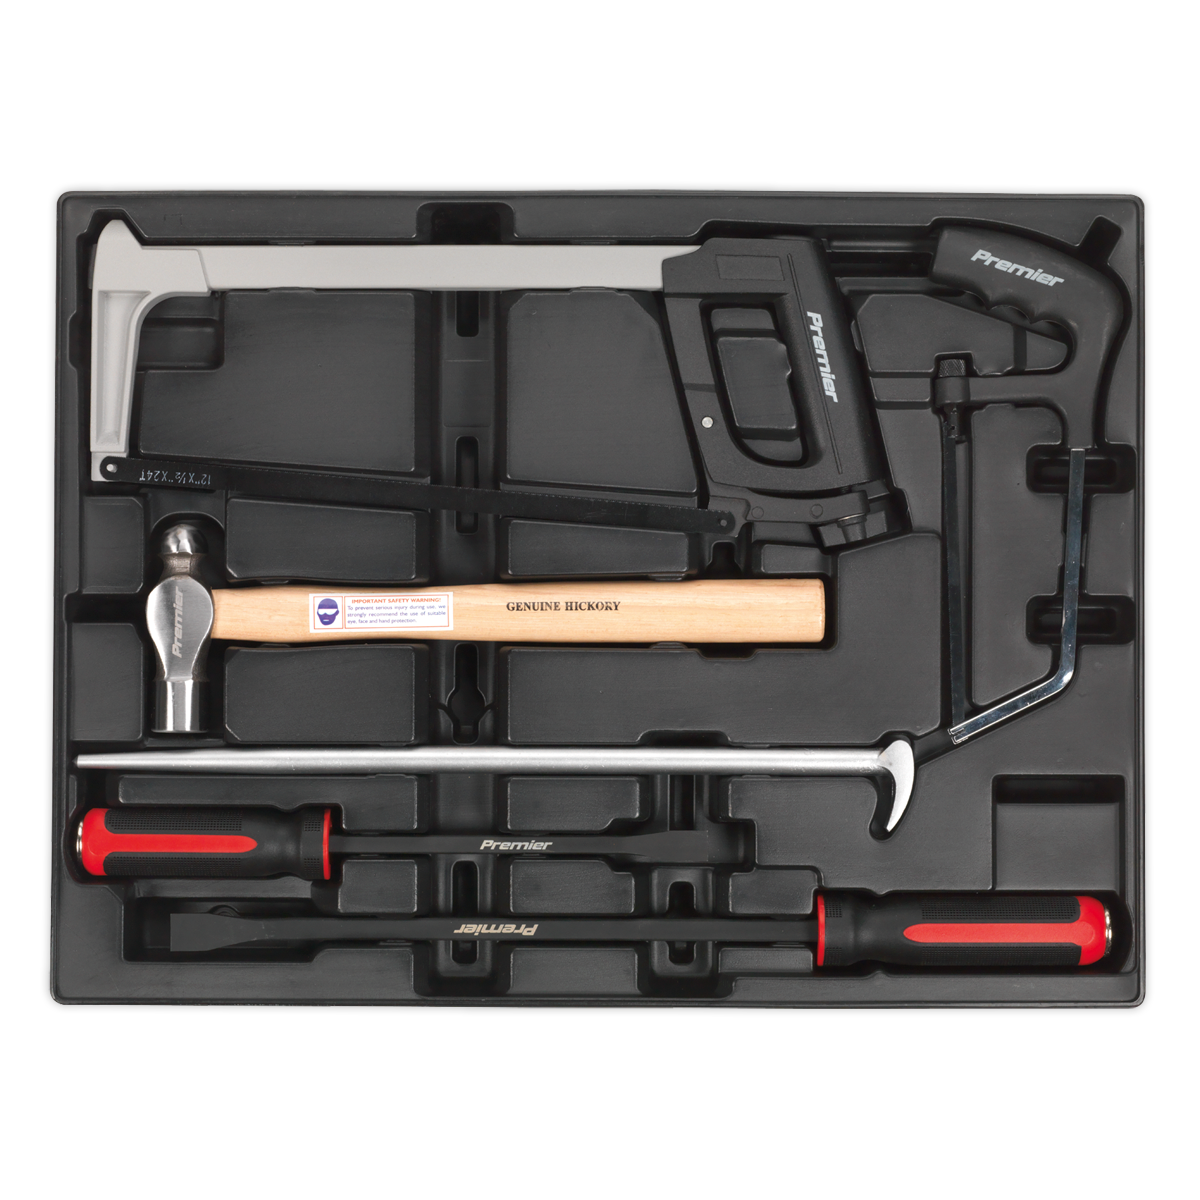 Sealey Tool Tray with Pry Bar, Hammer & Hacksaw Set 6pc